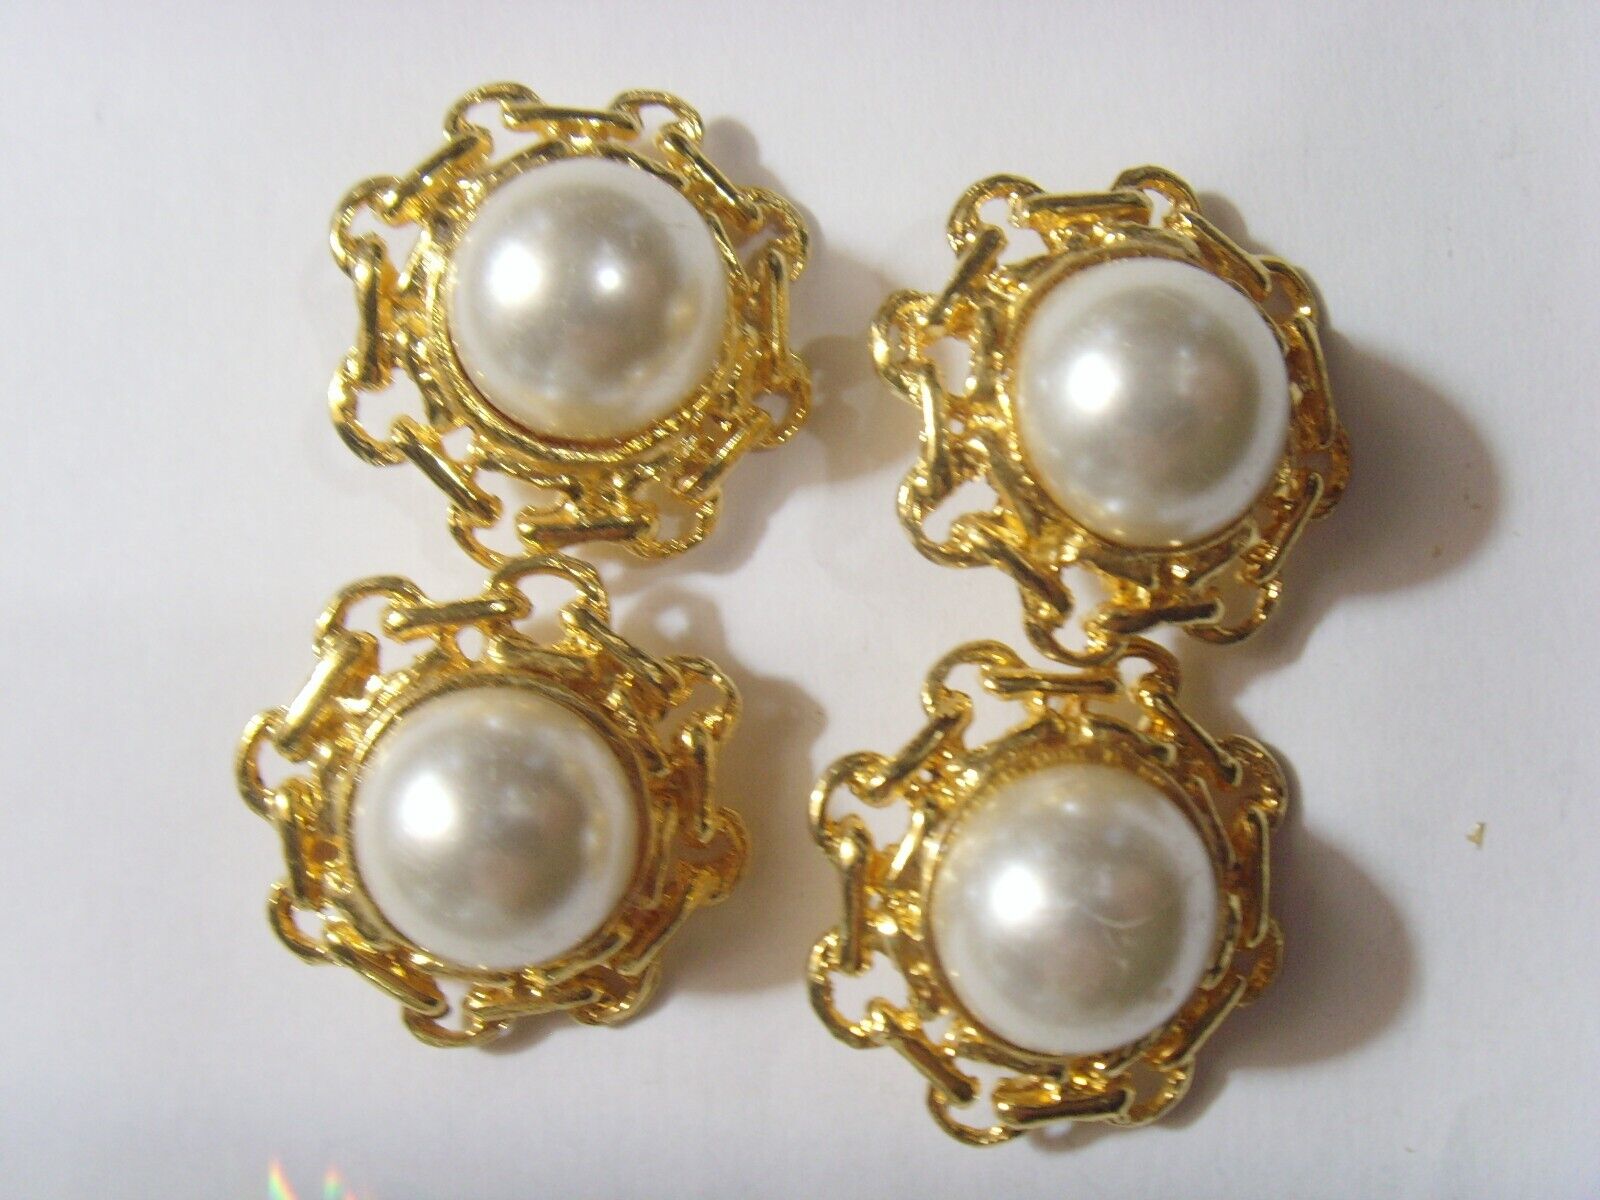 4 antique 30 mm matching gold tone metal faux pearl collector buttons 51910